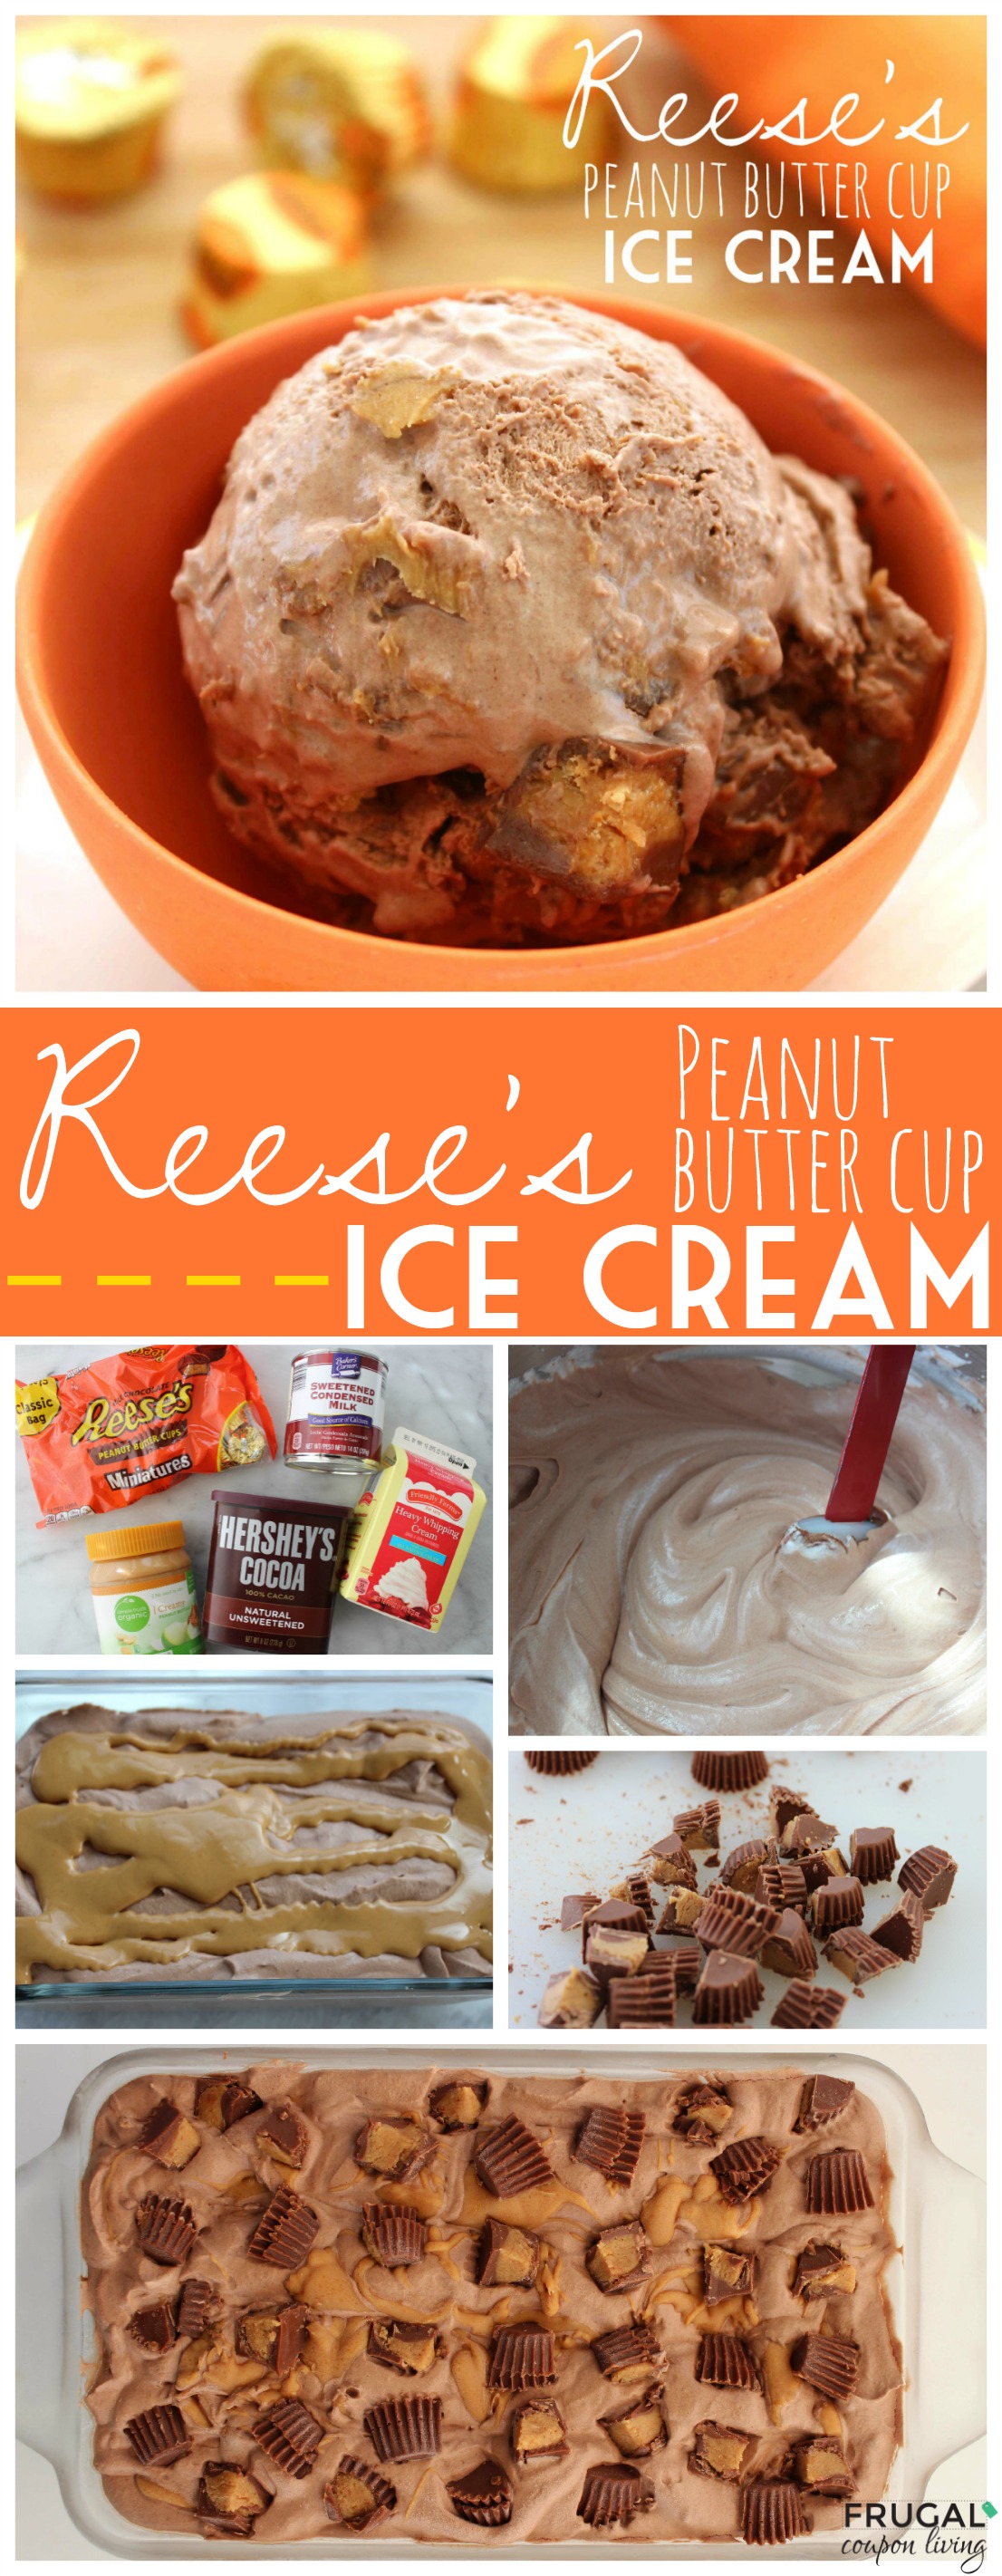 Reeses-ice-cream-collage-frugal-coupon-living